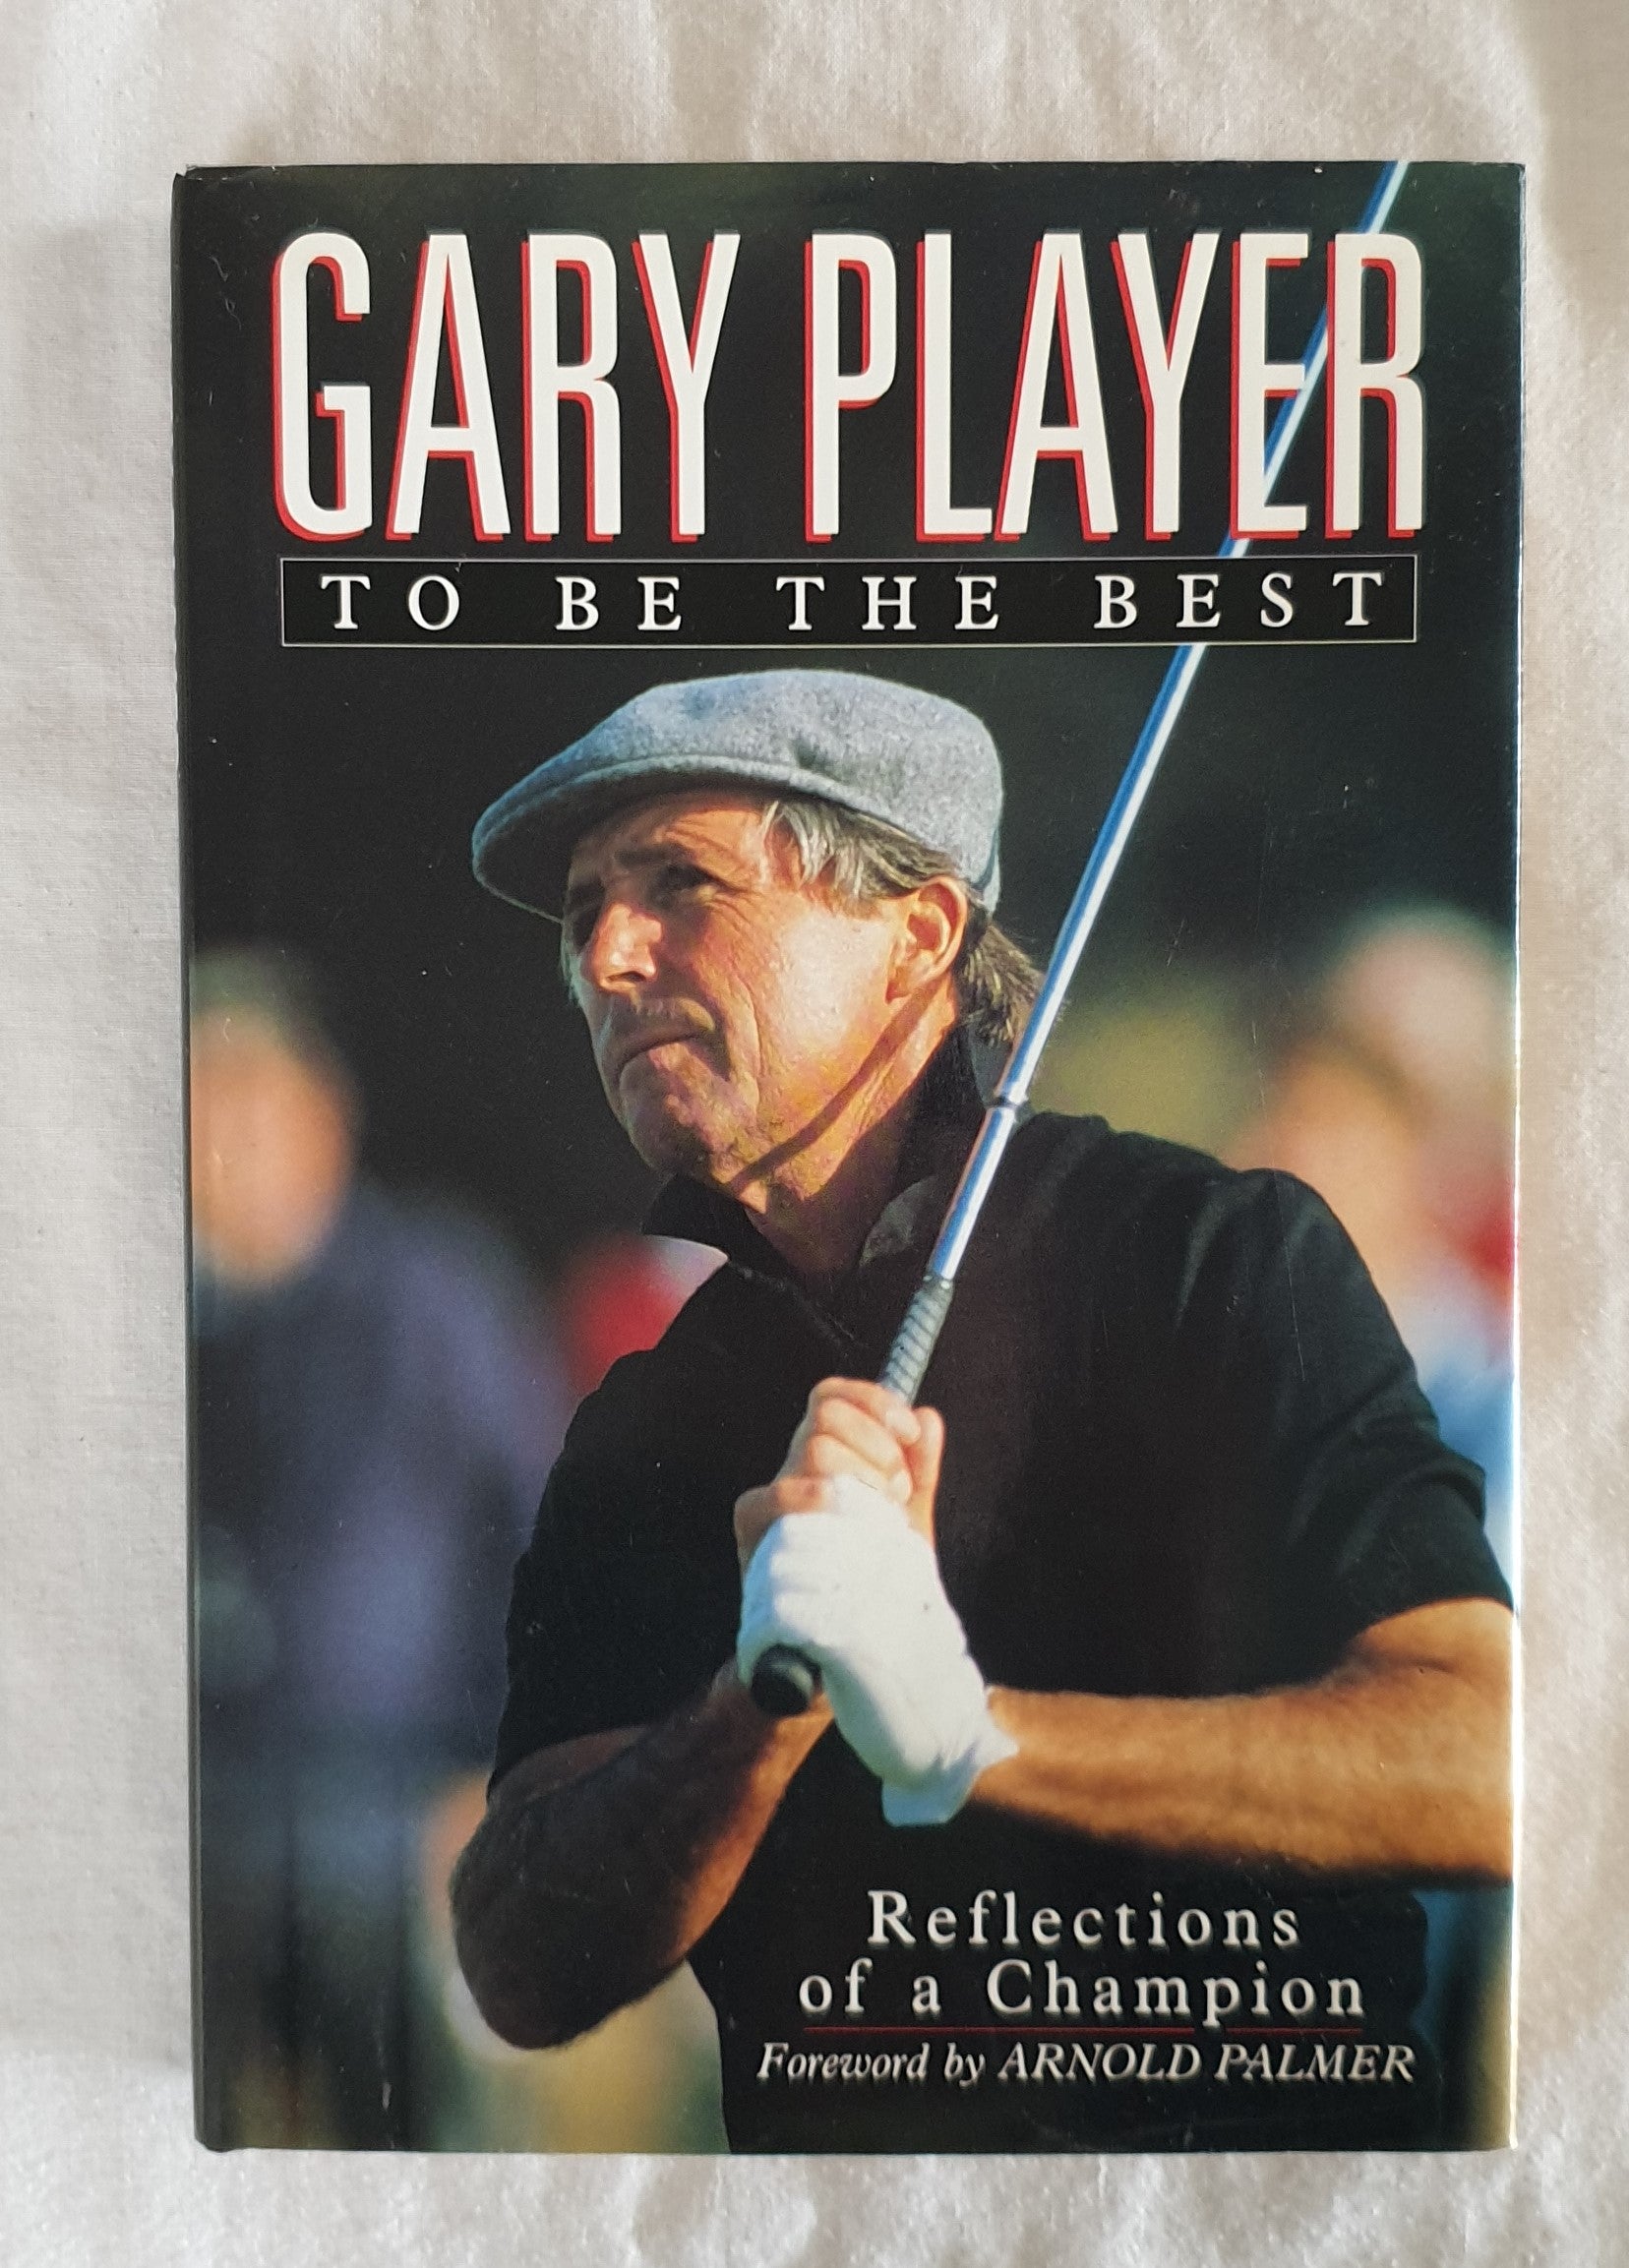 To Be The Best by Gary Player